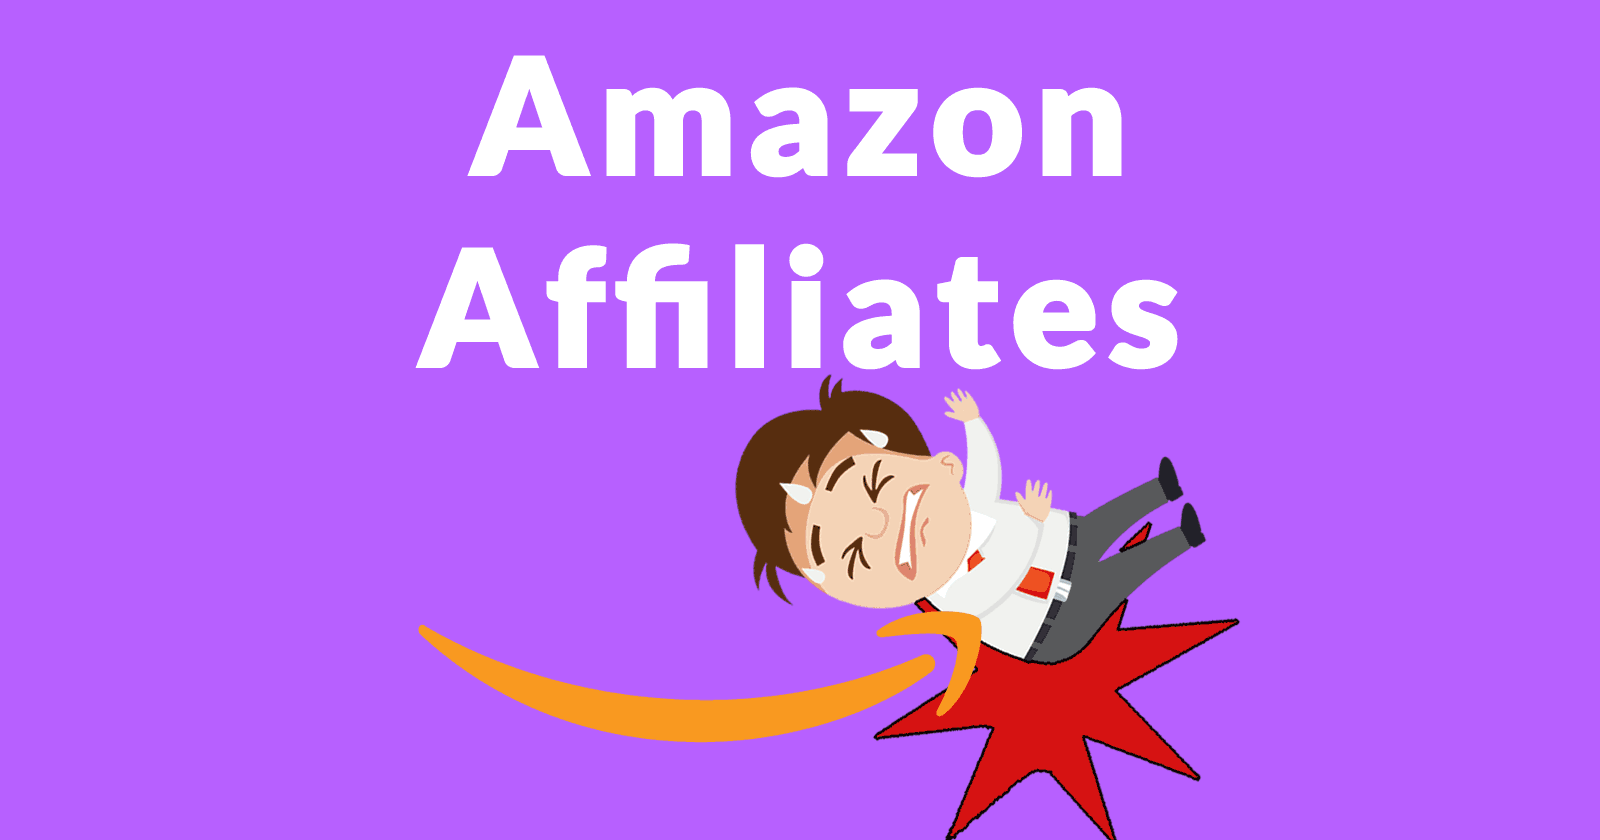 The words Amazon Affiliates over the image of Amazon's Smile logo whacking a man from behind, sending him flying in the air